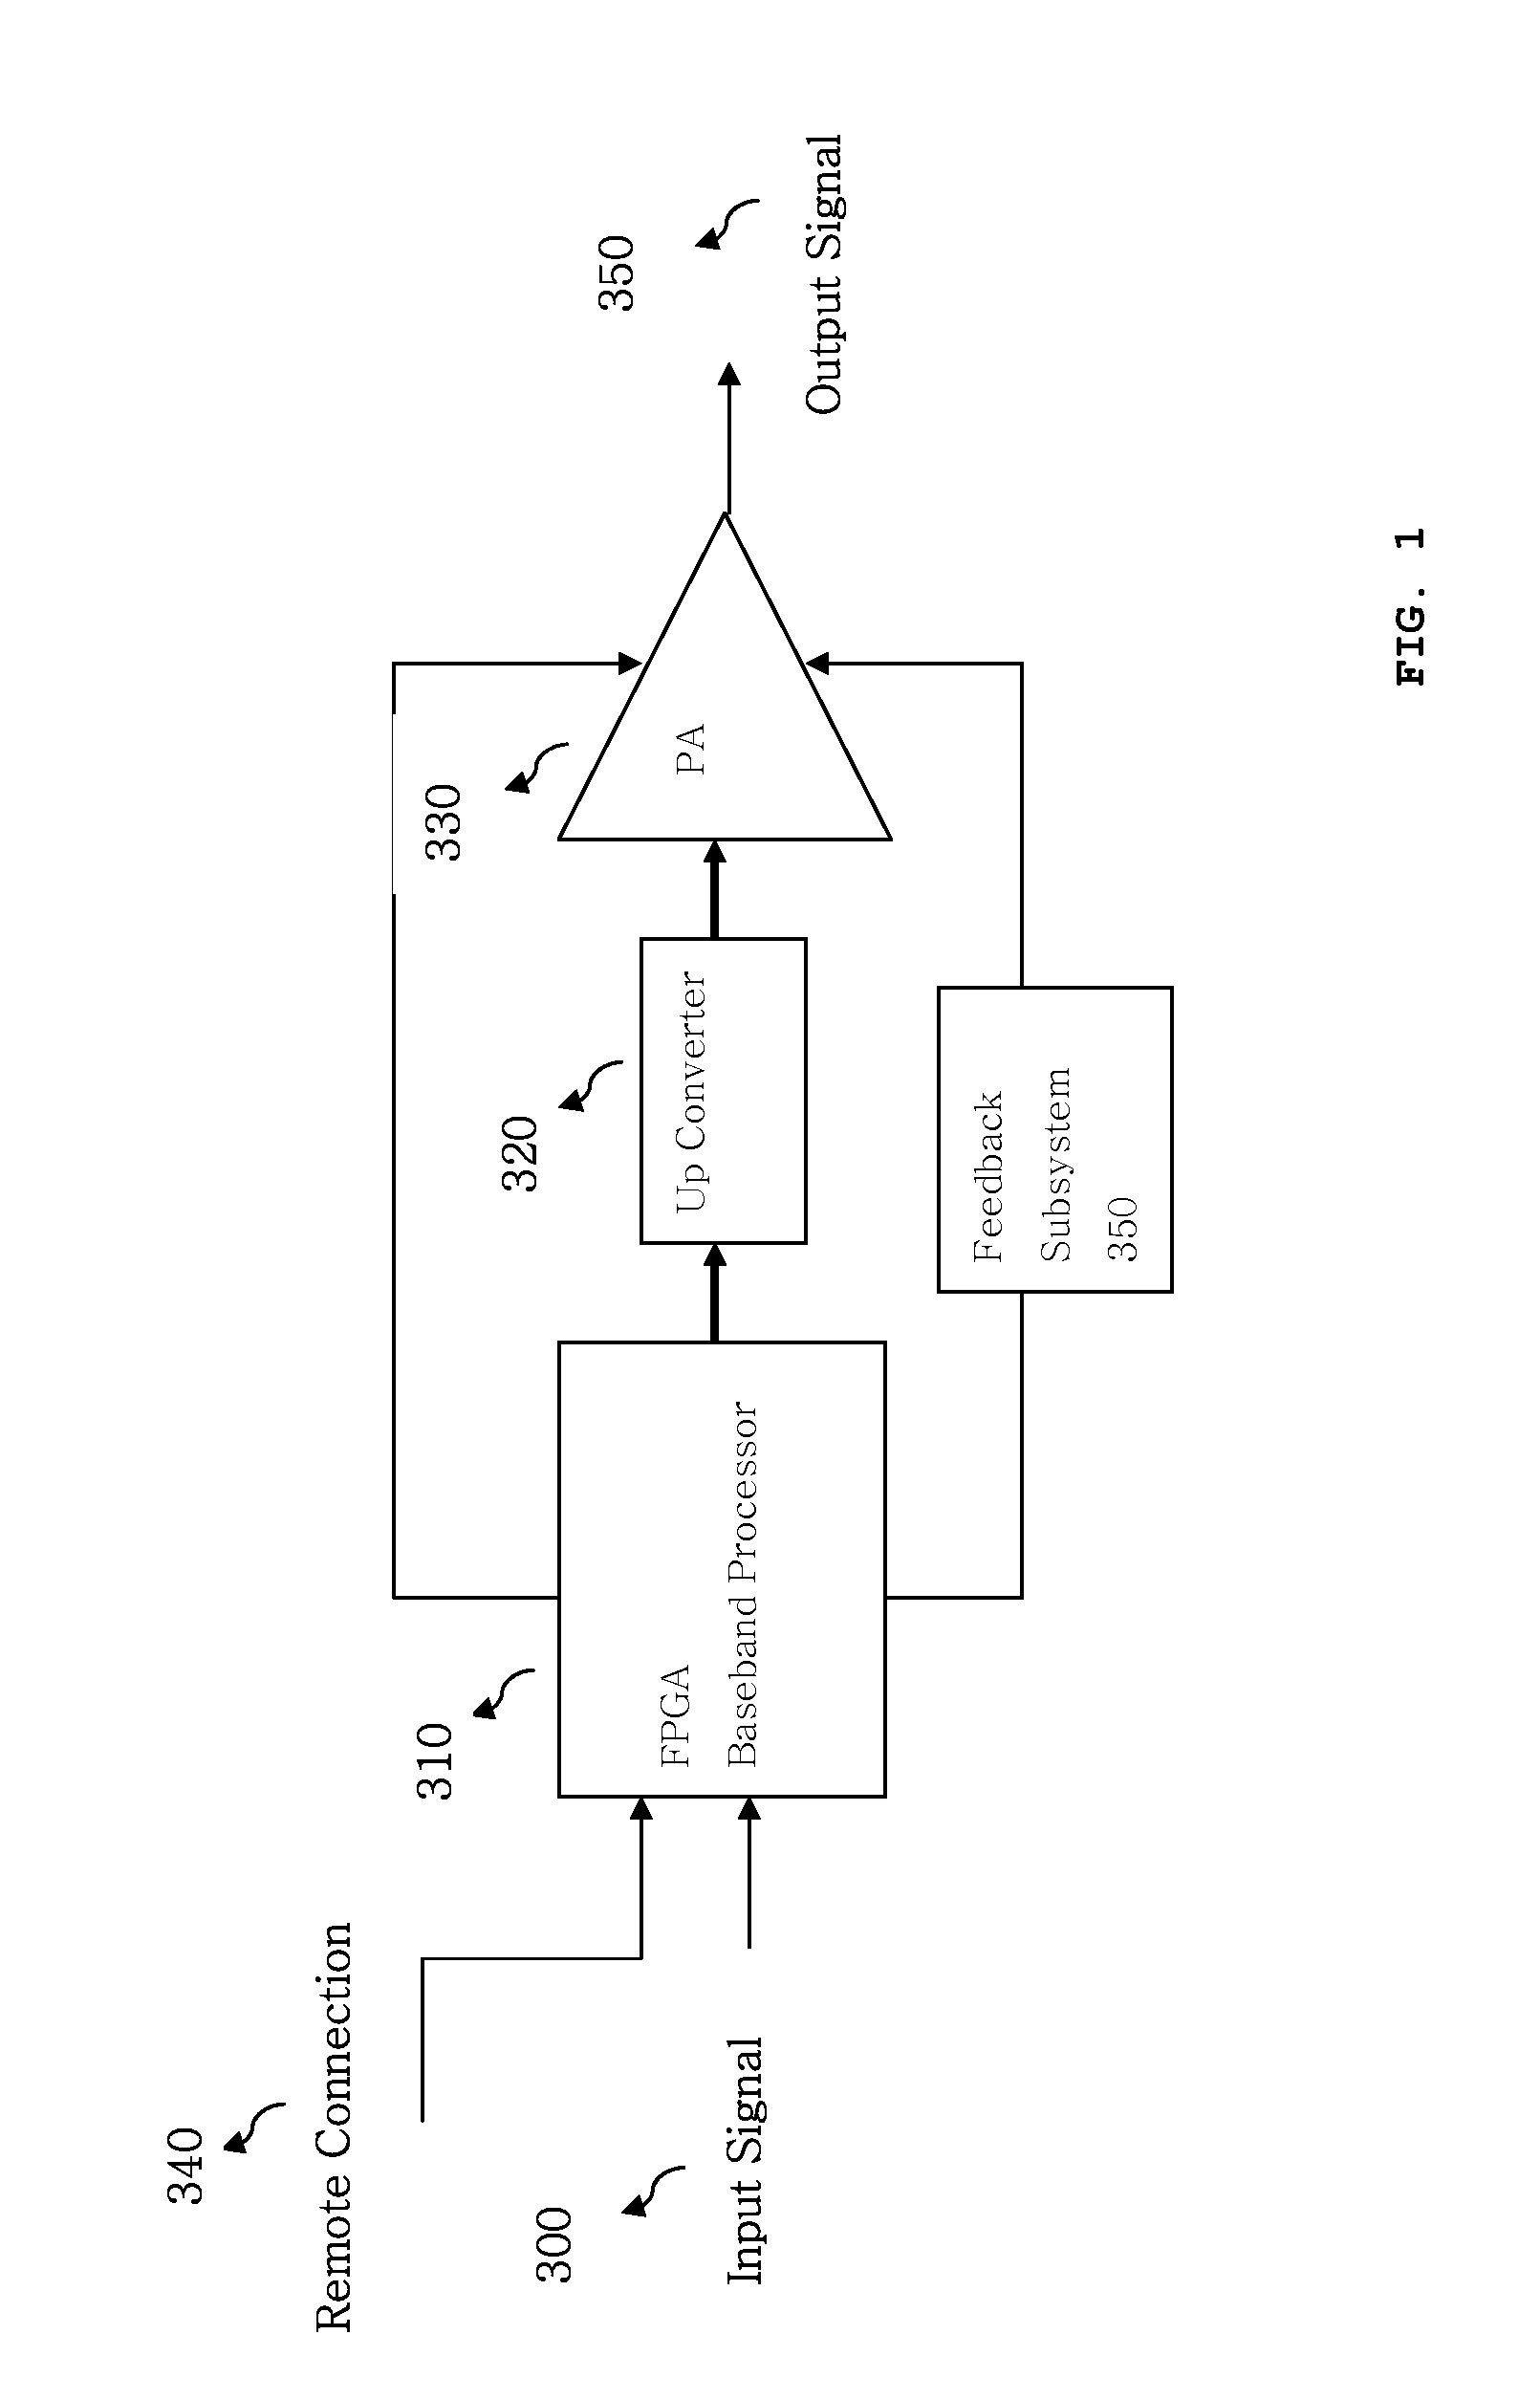 Remotely Reconfigurable Power Amplifier System and Method